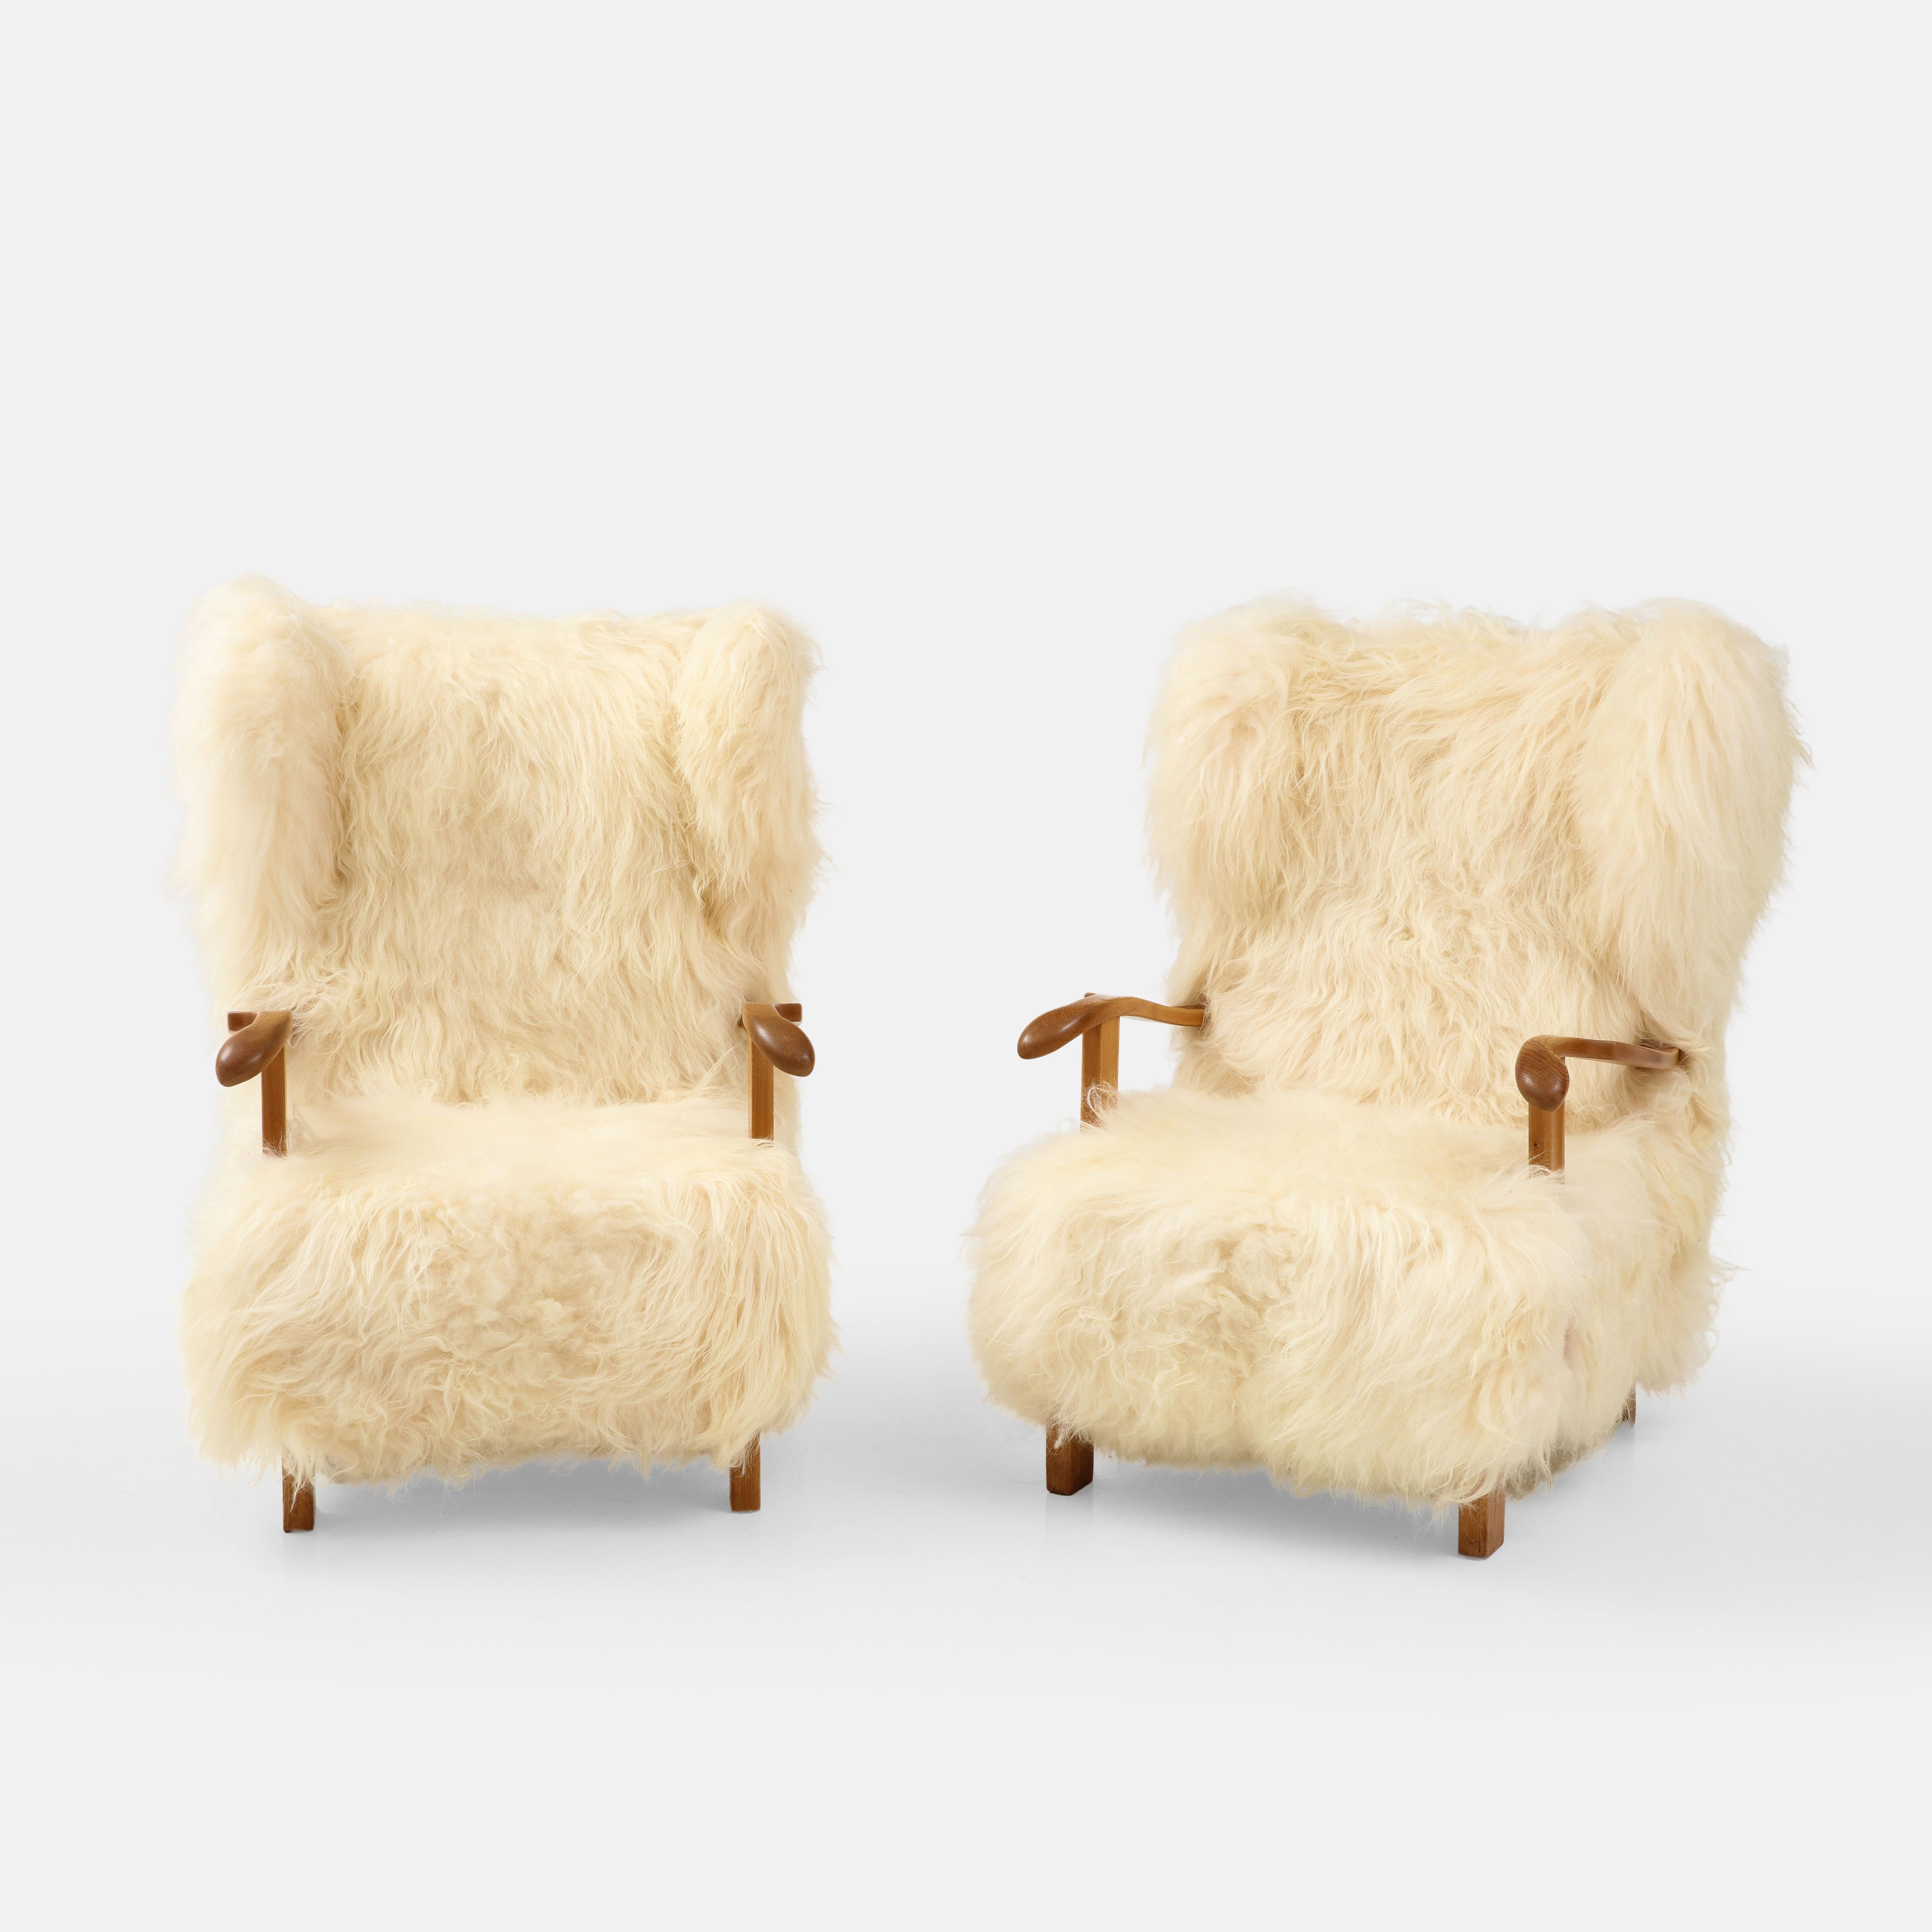 Fritz Hansen rare pair of large wingback lounge chairs model 1582 with beech wood frame and luxurious sheepskin upholstery, Denmark, 1930s.  These incredibly chic early Danish period armchairs or easy chairs have generous proportions throughout